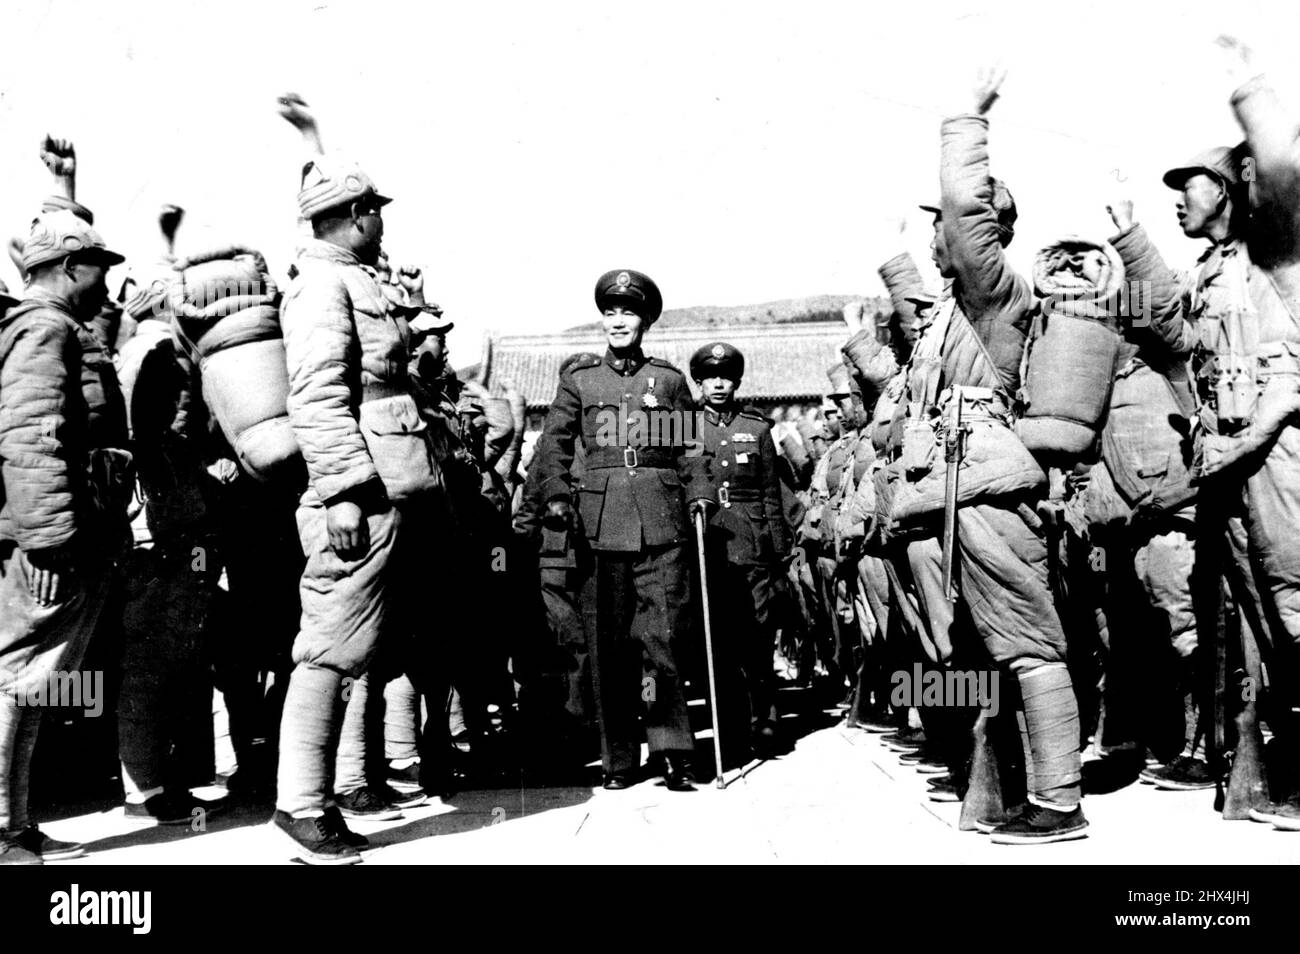 President Chiang Kai-shek (center) is cheered by troops in Nanking, Jan. 16, where he inspected the entire garrison and watched what was called the most spectacular and greatest review of Chinese troops since the end of World War II. The review was among his last official acts before his resignation on Jan. 21, which ended his 22-year rule of China. Generalissimo Ching Kai-shek was represented as a clever and successful military leader. In fact he was 'an incompetent facist commander without the wit to act in his own interests'. February 10, 1949. (Photo by AP Photo) Stock Photo